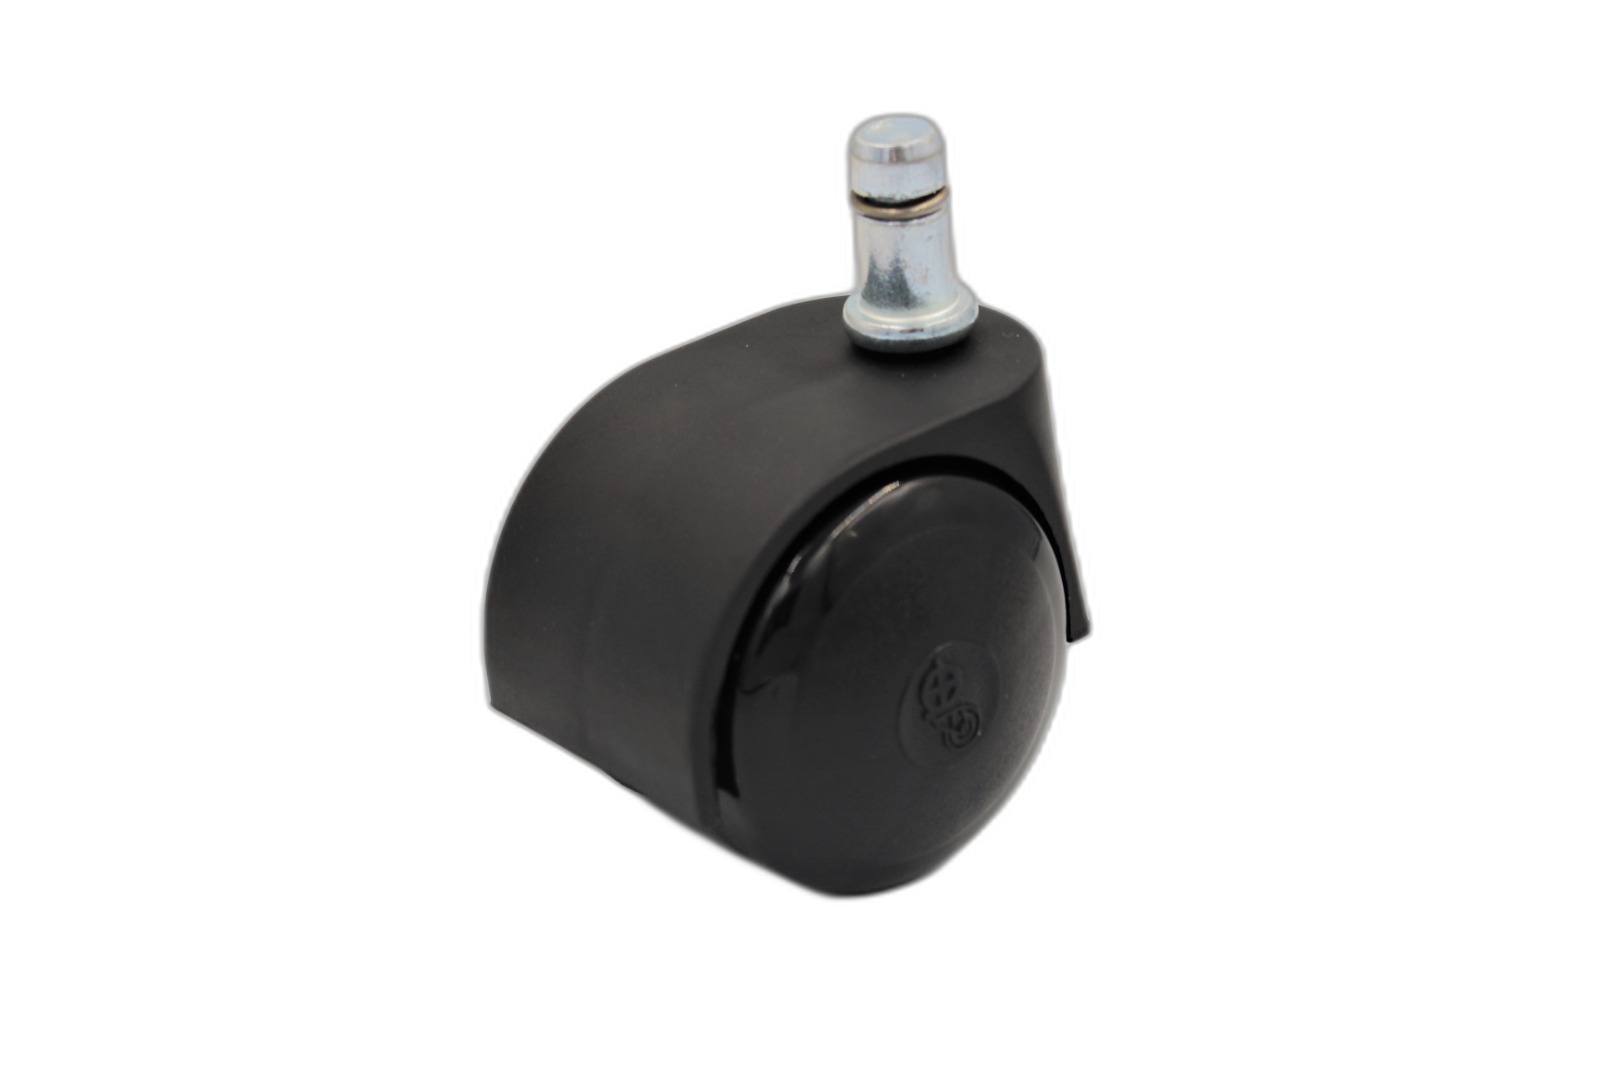 HTS Caster | N6 Buro Type Pin Caster- Plastic Caster- Furniture Caster